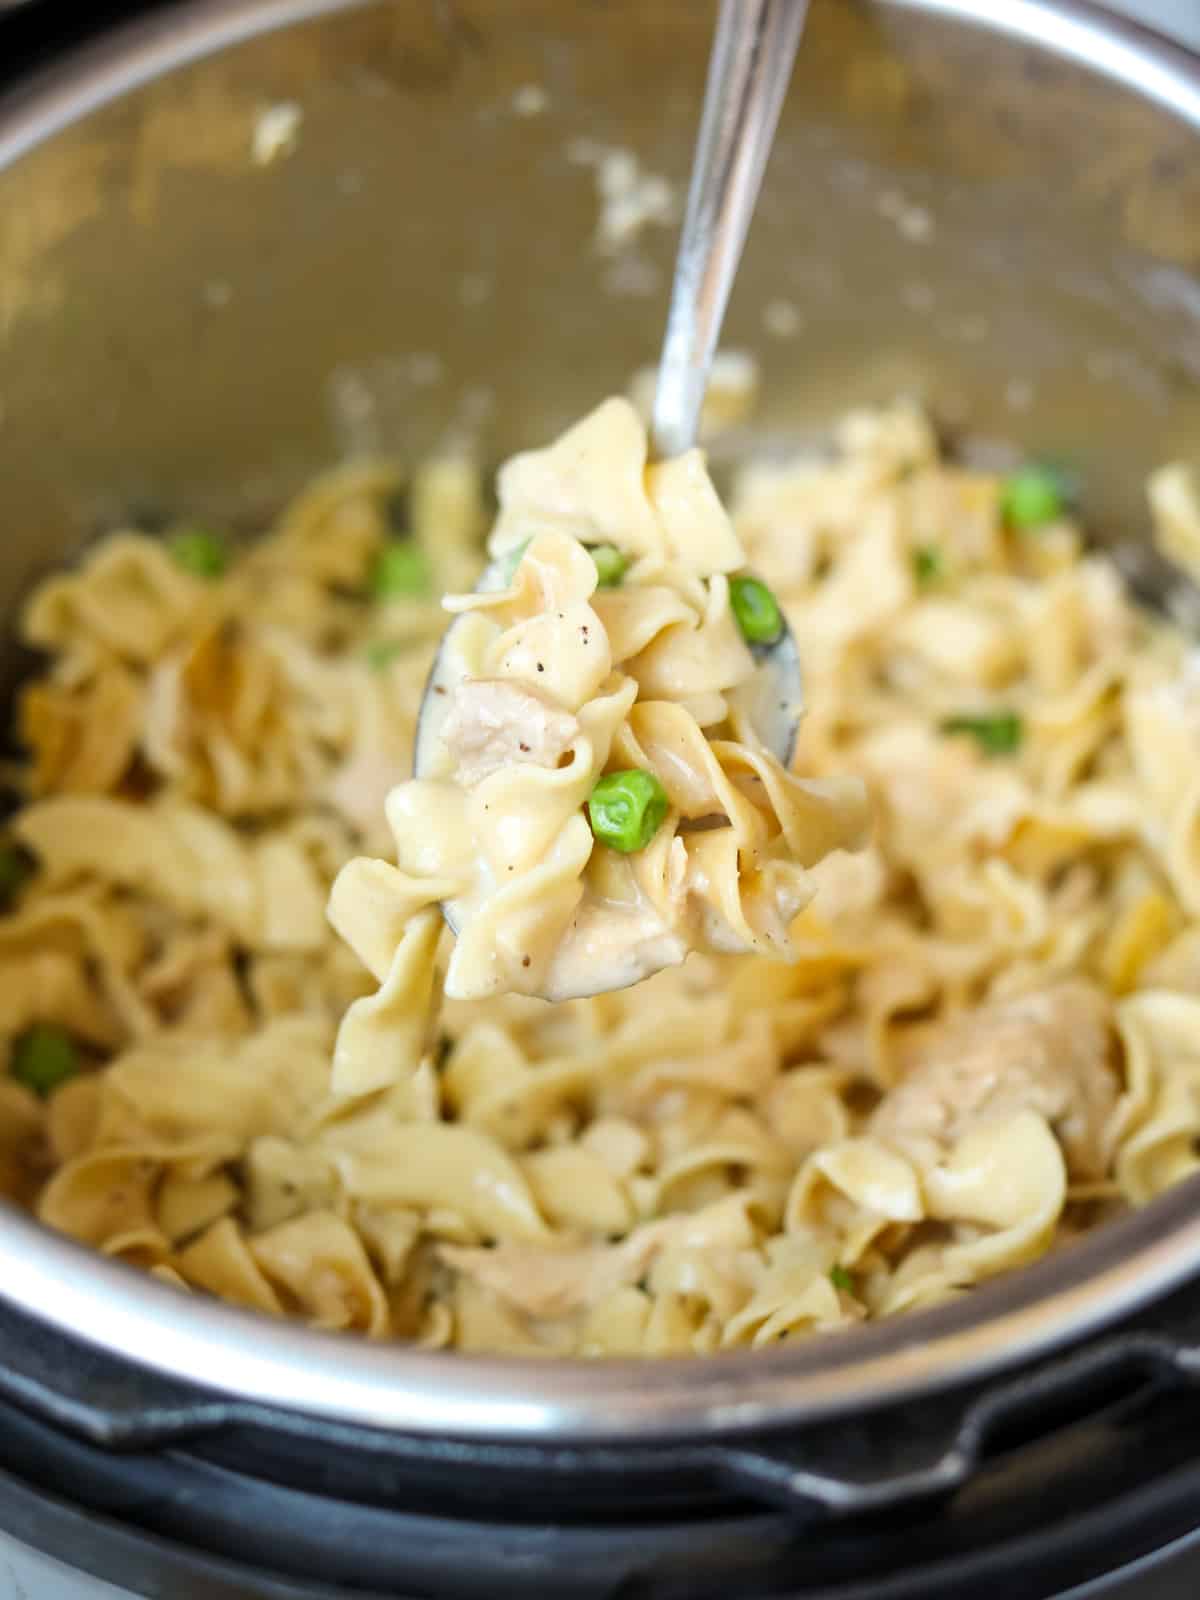 Spoon coming out of Instant Pot with noodles, tuna, and peas.